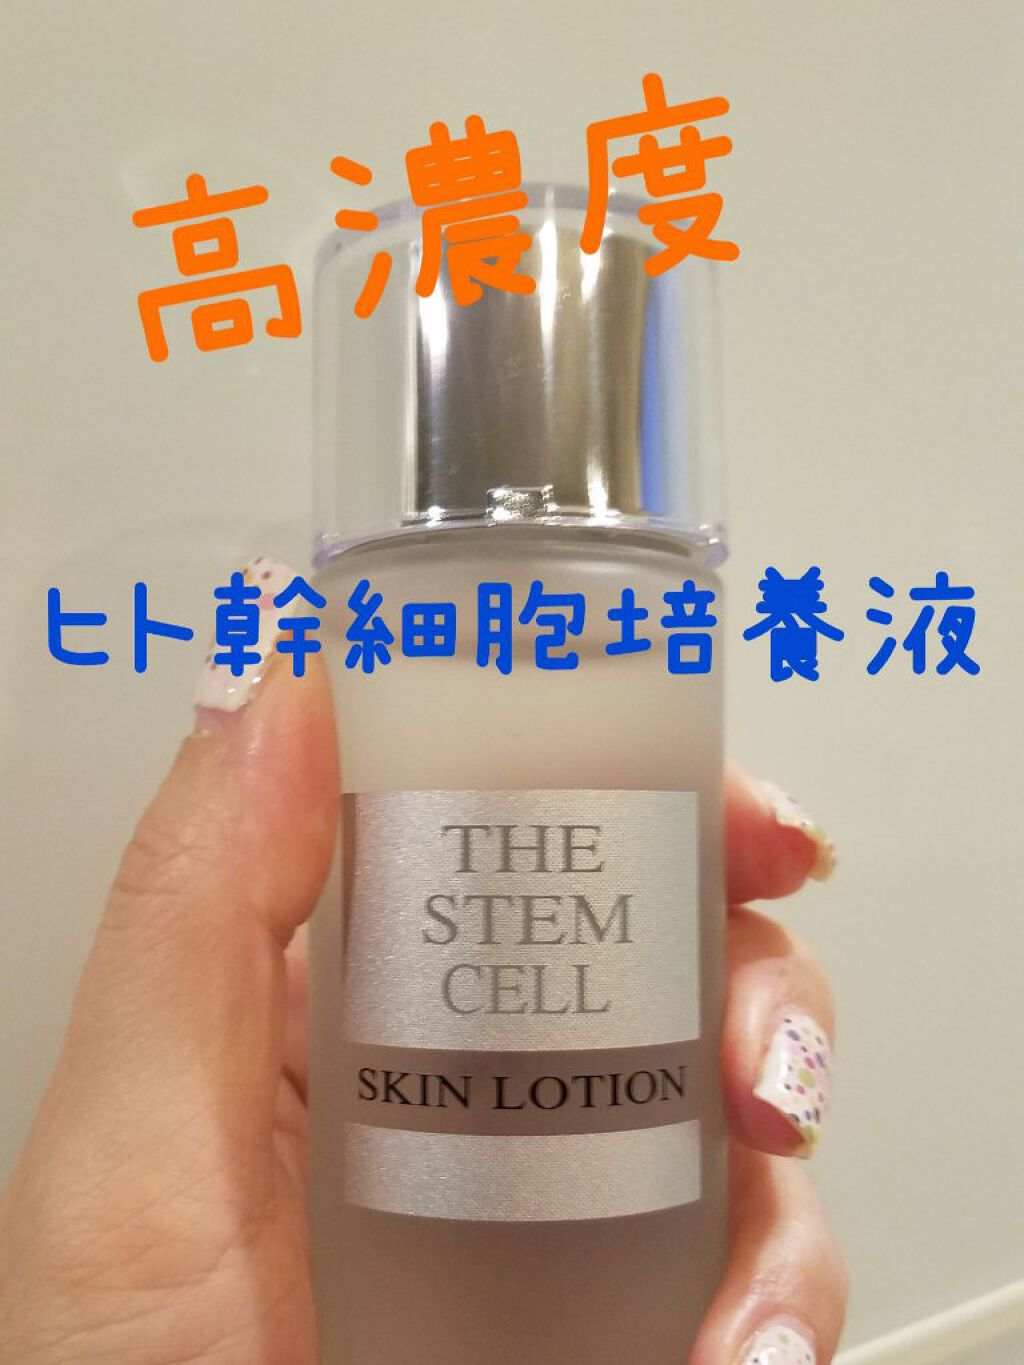 SKIN LOTION (化粧水)｜THE STEM CELLの口コミ - #ドンキー で大きい ...